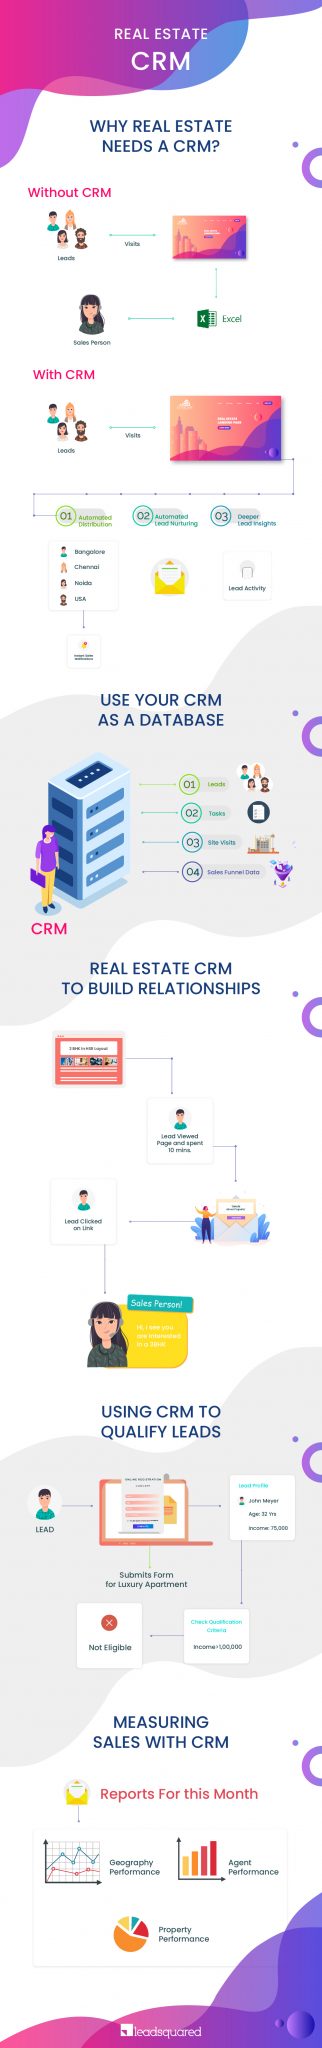 real estate CRM - infographic